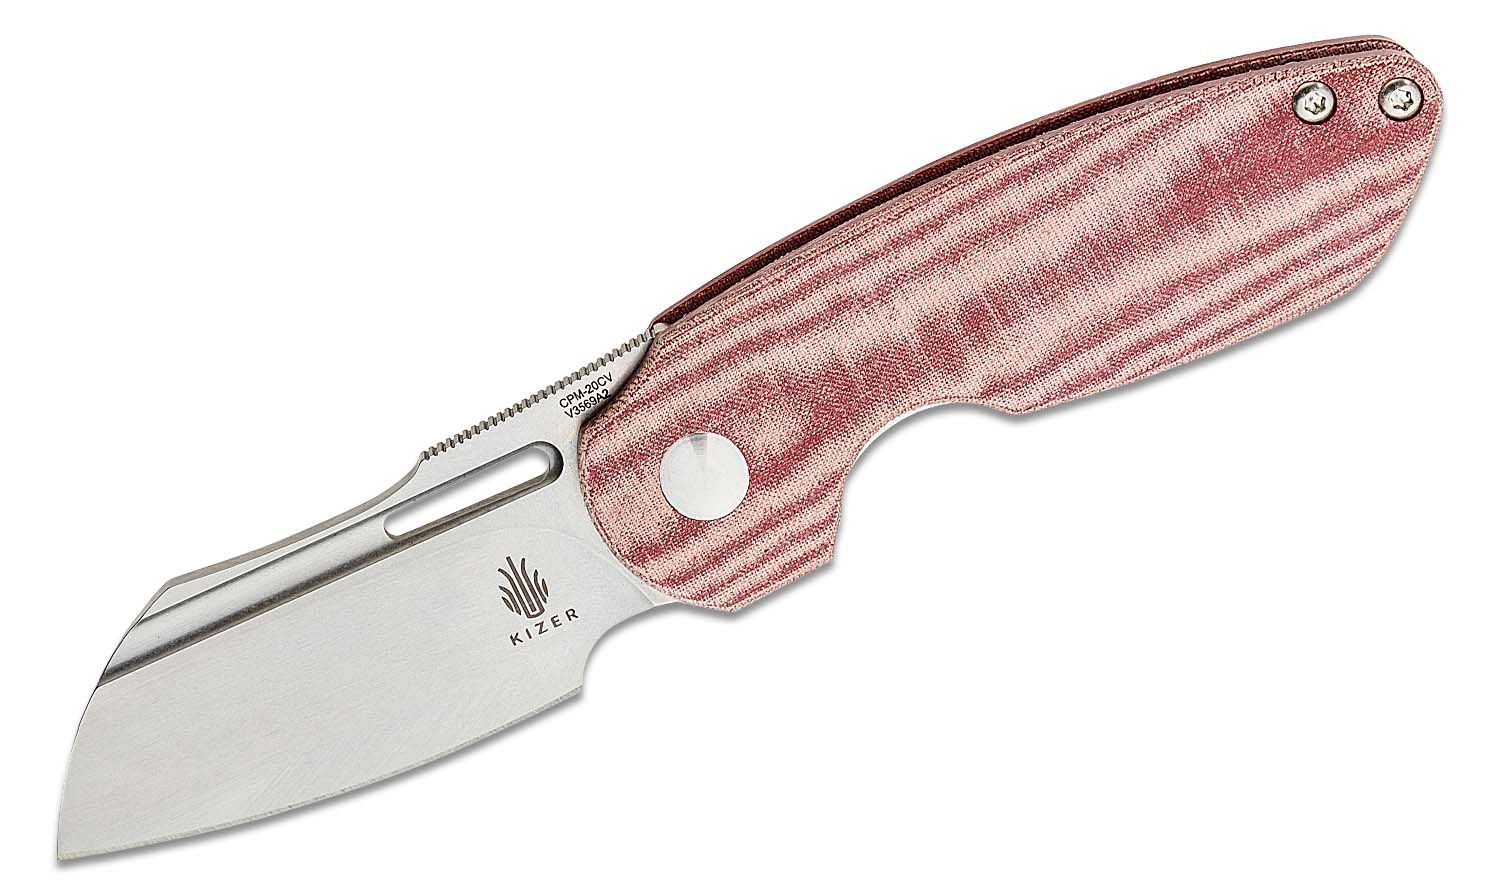 Messermeister 4.5” Serrated Tomato Knife with Matching Sheath, Red - German  1.4116 Steel Alloy - Rust Resistant & Easy to Maintain - Handcrafted in